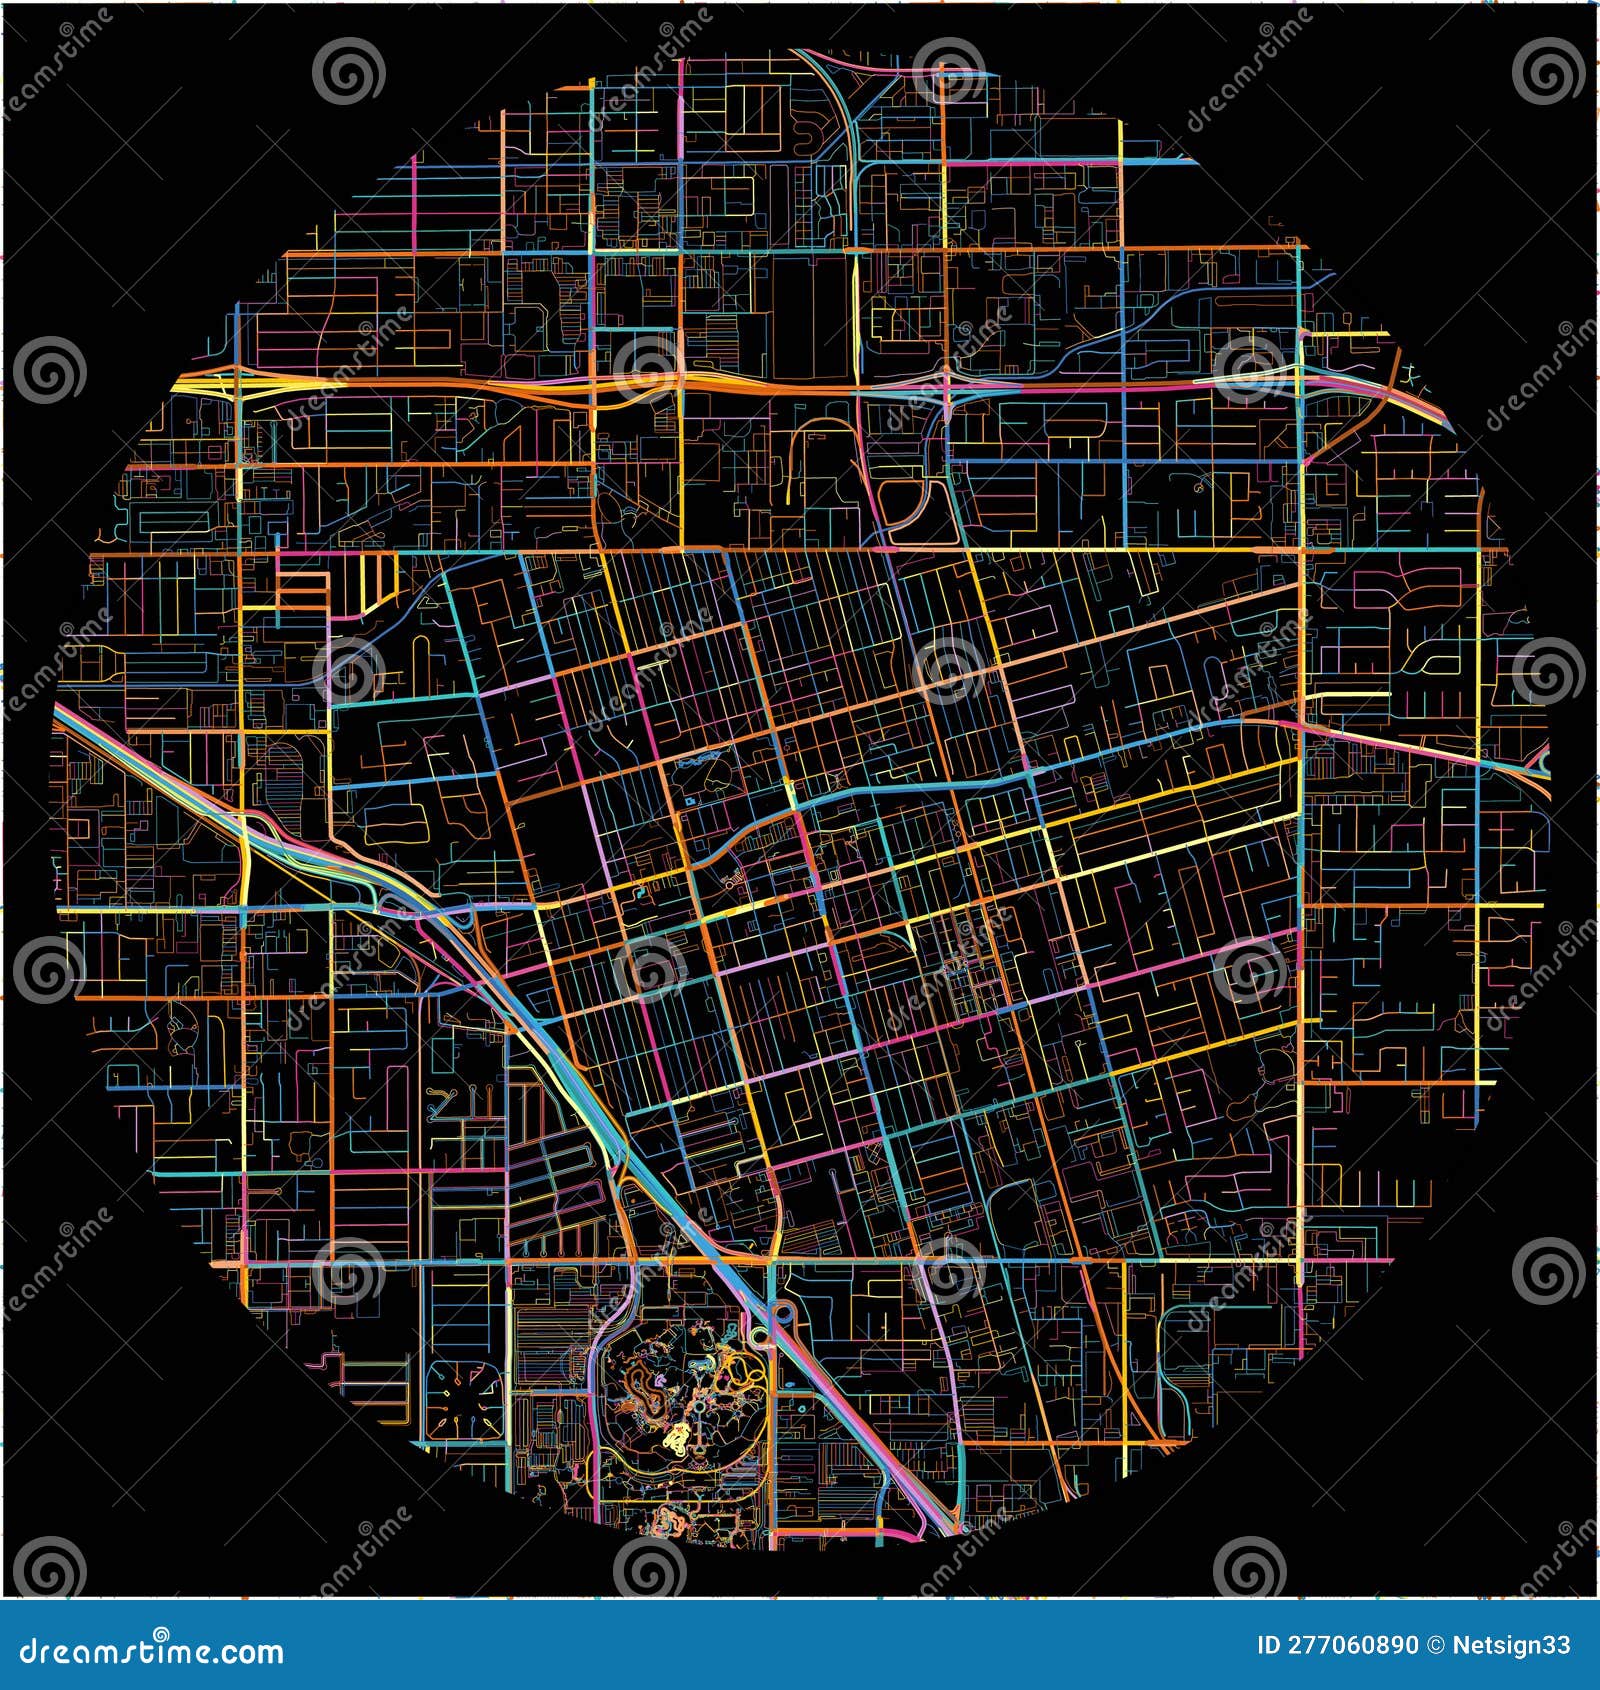 colorful map of anaheim, california with all major and minor roads